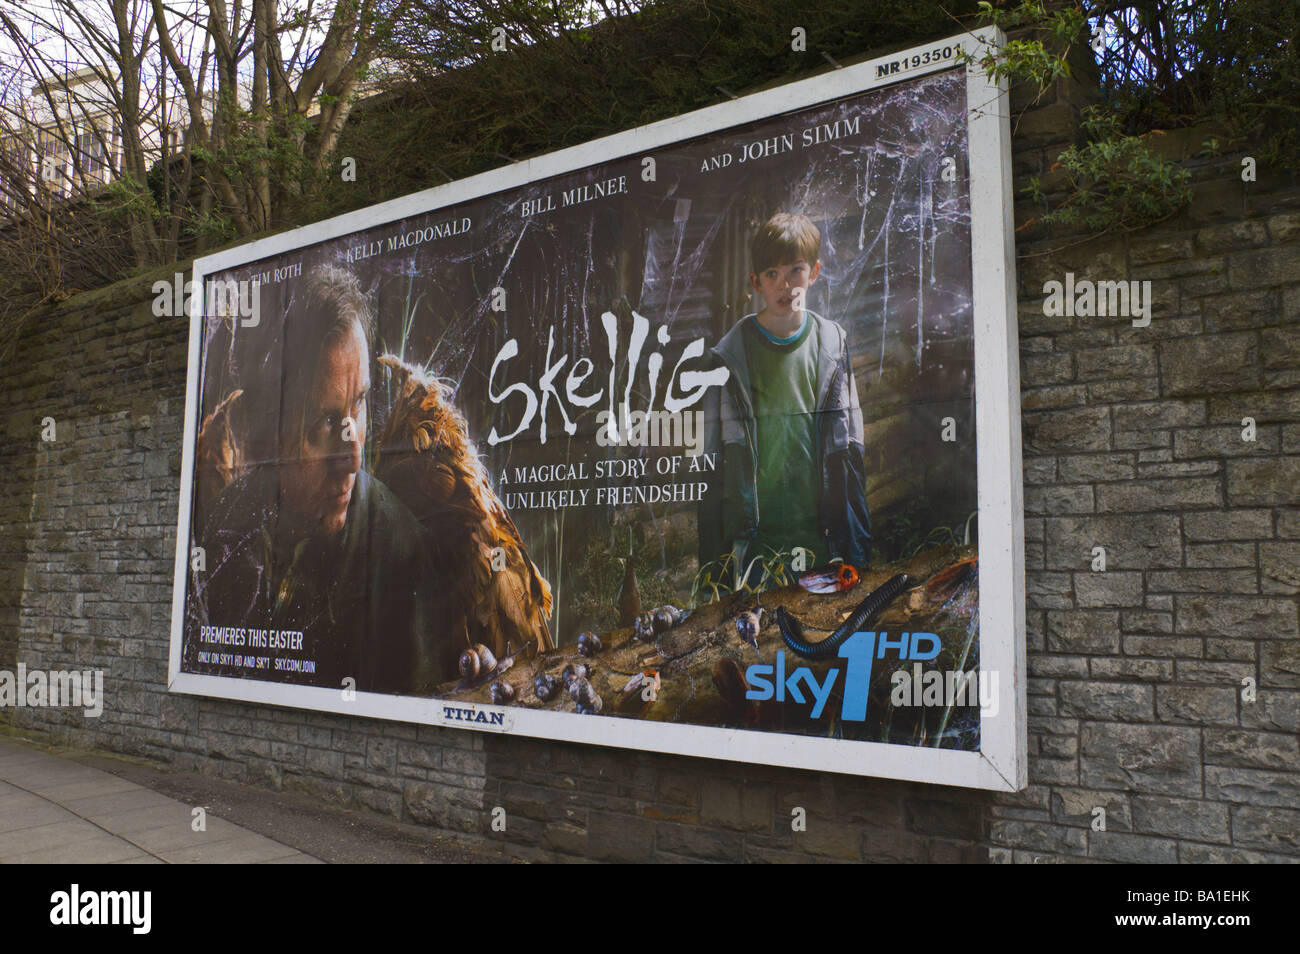 Titan advertising billboard for film Skellig on Sky 1HD on stone wall in Cardiff South Wales UK Stock Photo